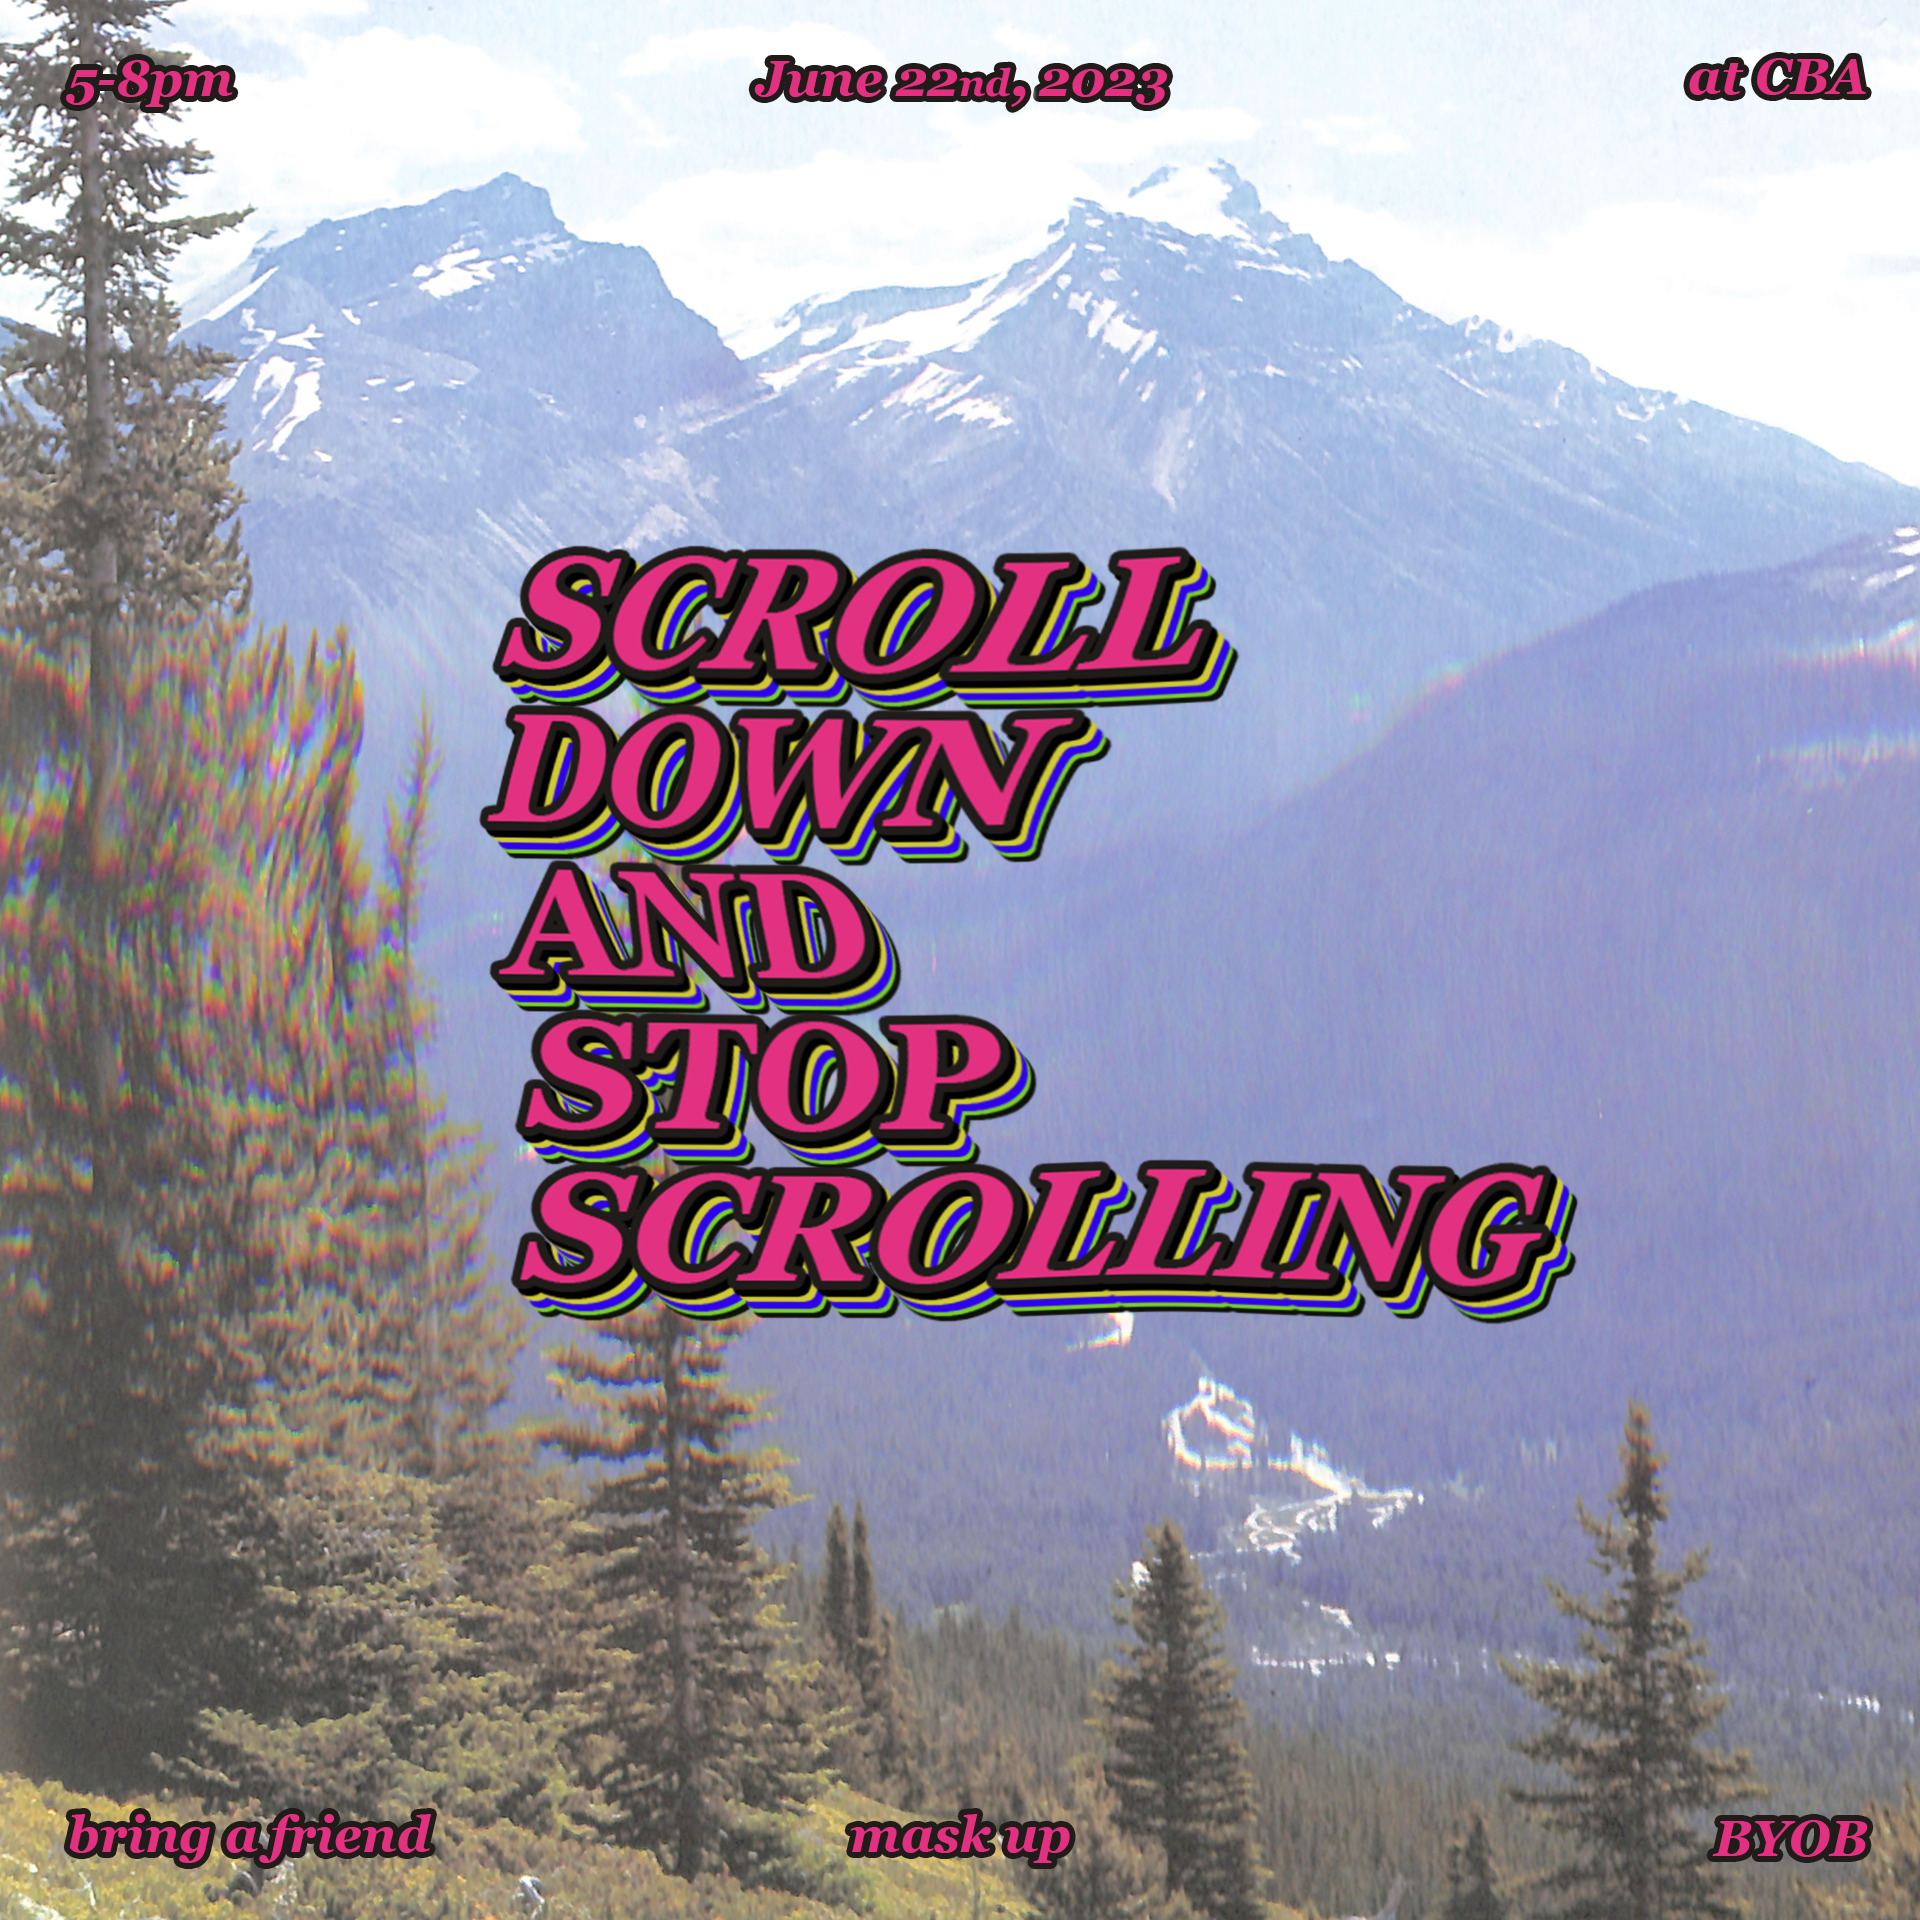 Flyer with pink italic text that reads "scroll down and stop scrolling," with details about the event in the corners of the image: June 22, 2023, 5-8pm, at CBA, BYOB, mask up, and bring a friend. the background is a picture of a mountain range, photocopied in such a way that makes the red, yellow, and blue colors blur out from around the outlines.